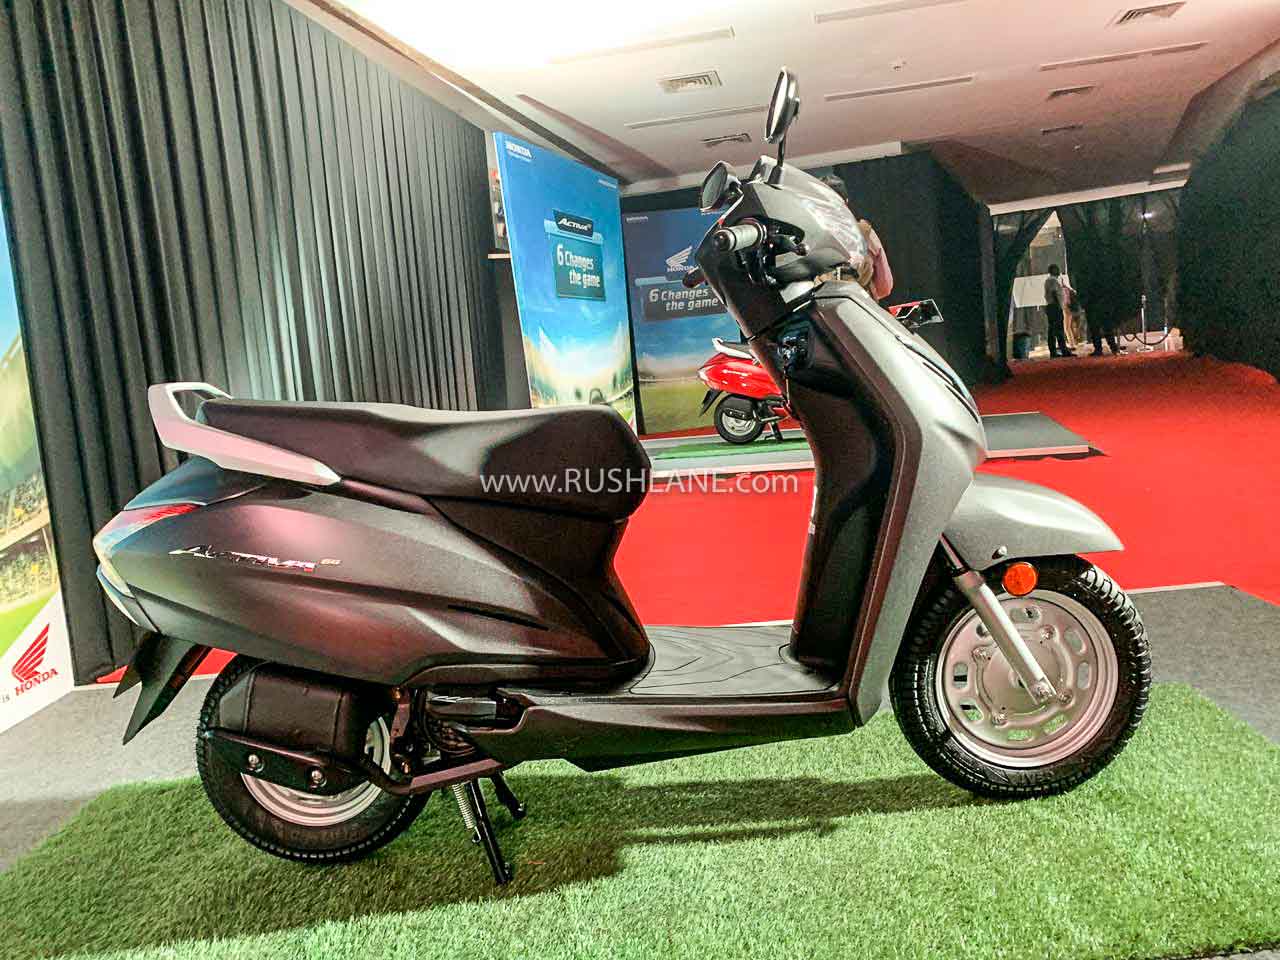 Honda Activa 6g Bs6 Scooter Launch Price Rs 64k Gets 6 Changes